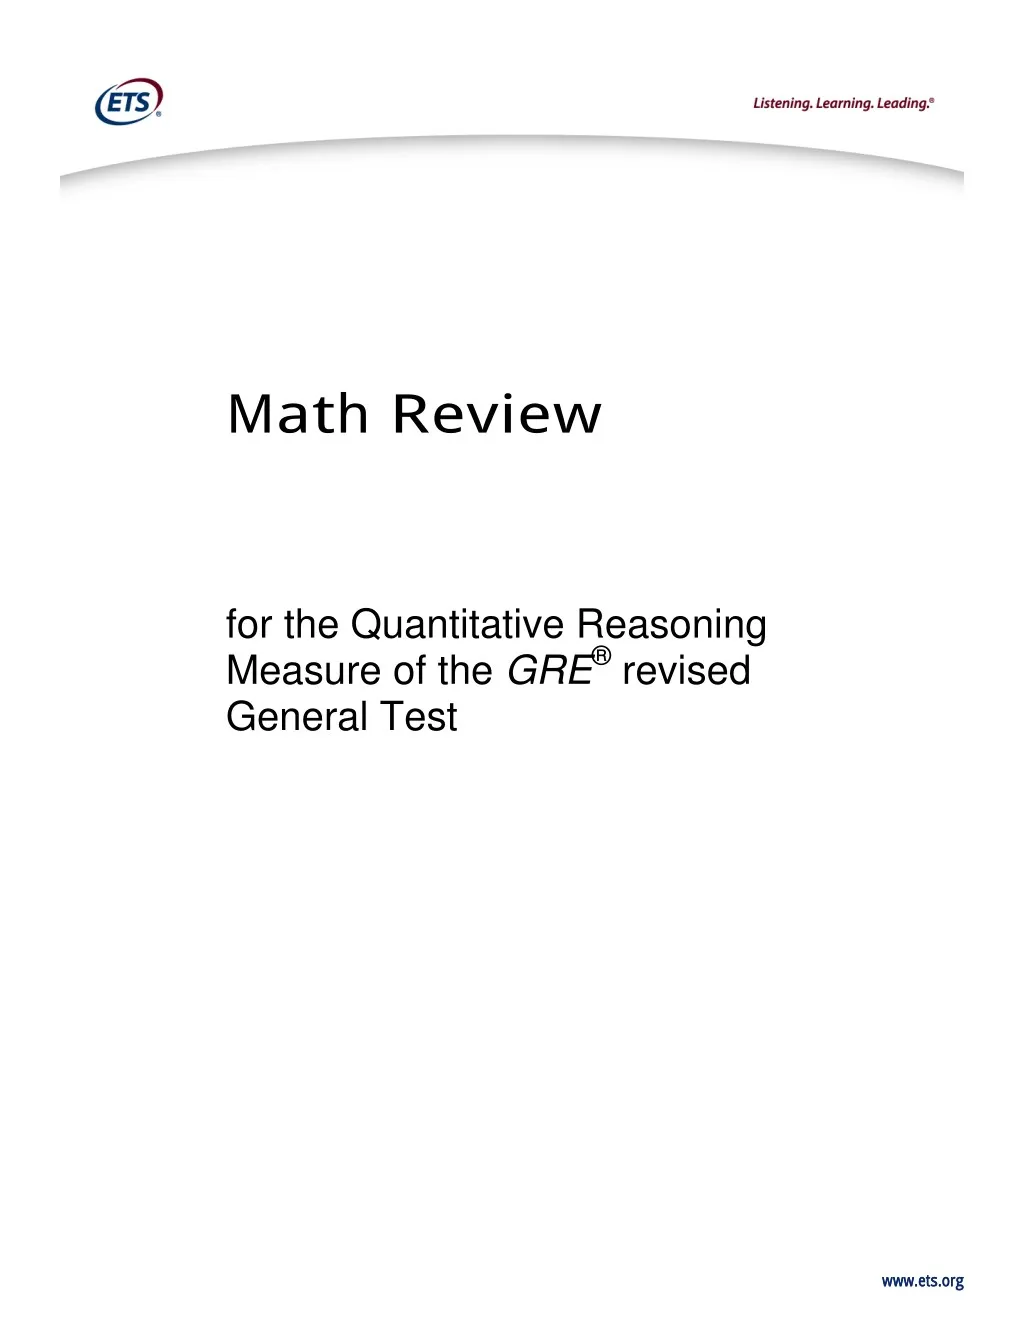 math review for the quantitative reasoning